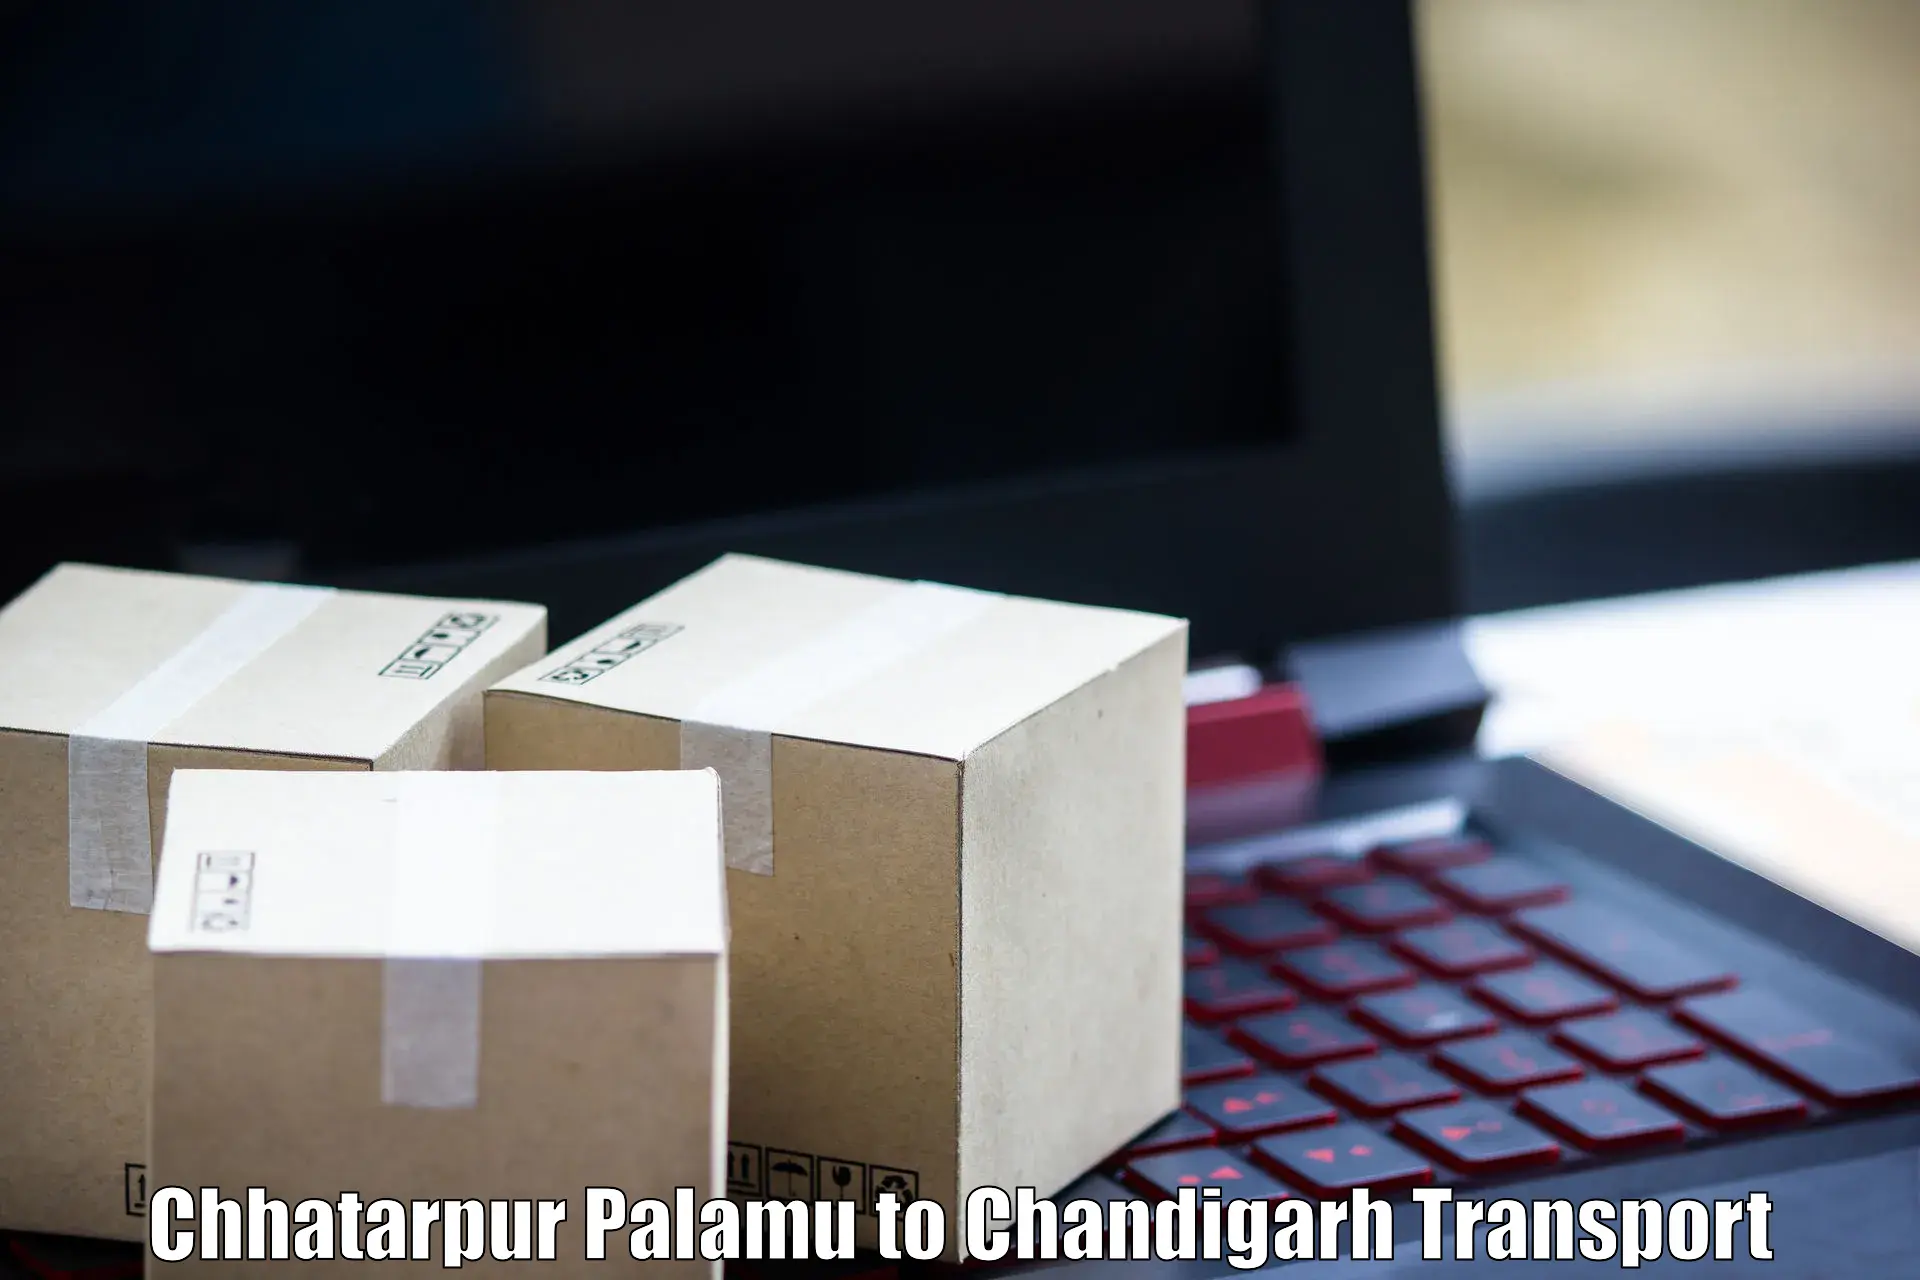 Parcel transport services in Chhatarpur Palamu to Chandigarh